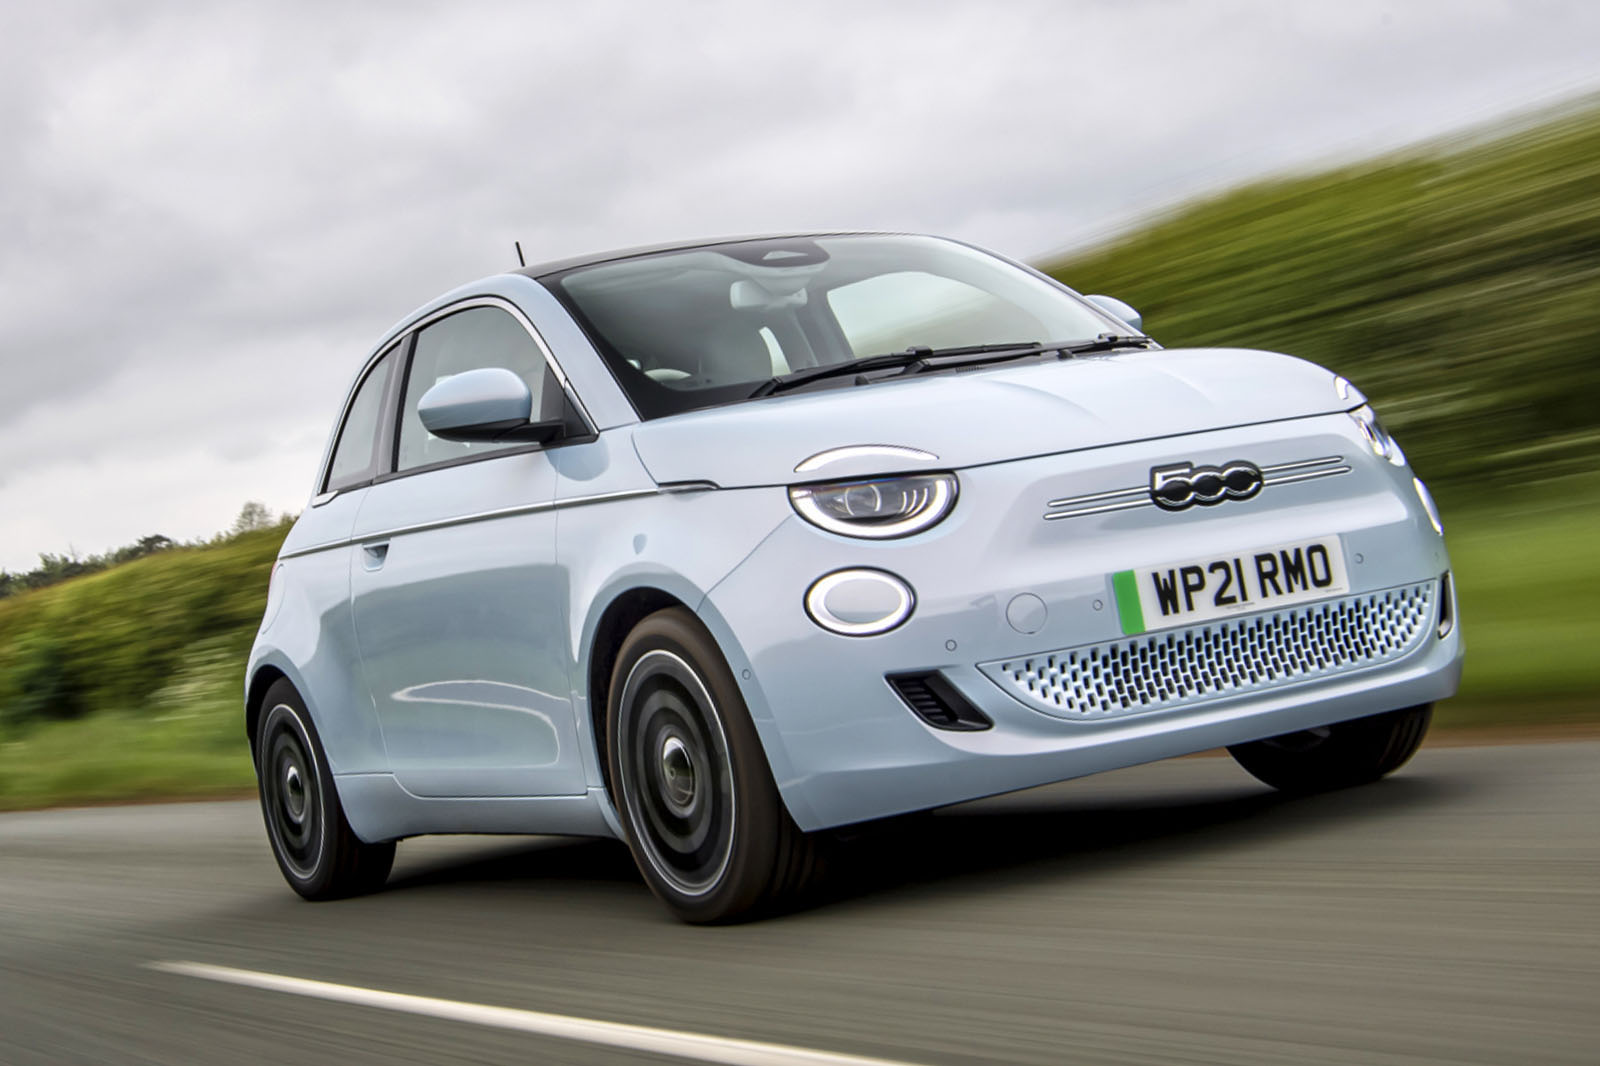 Low-cost tiny electric cars like these could be the next big thing